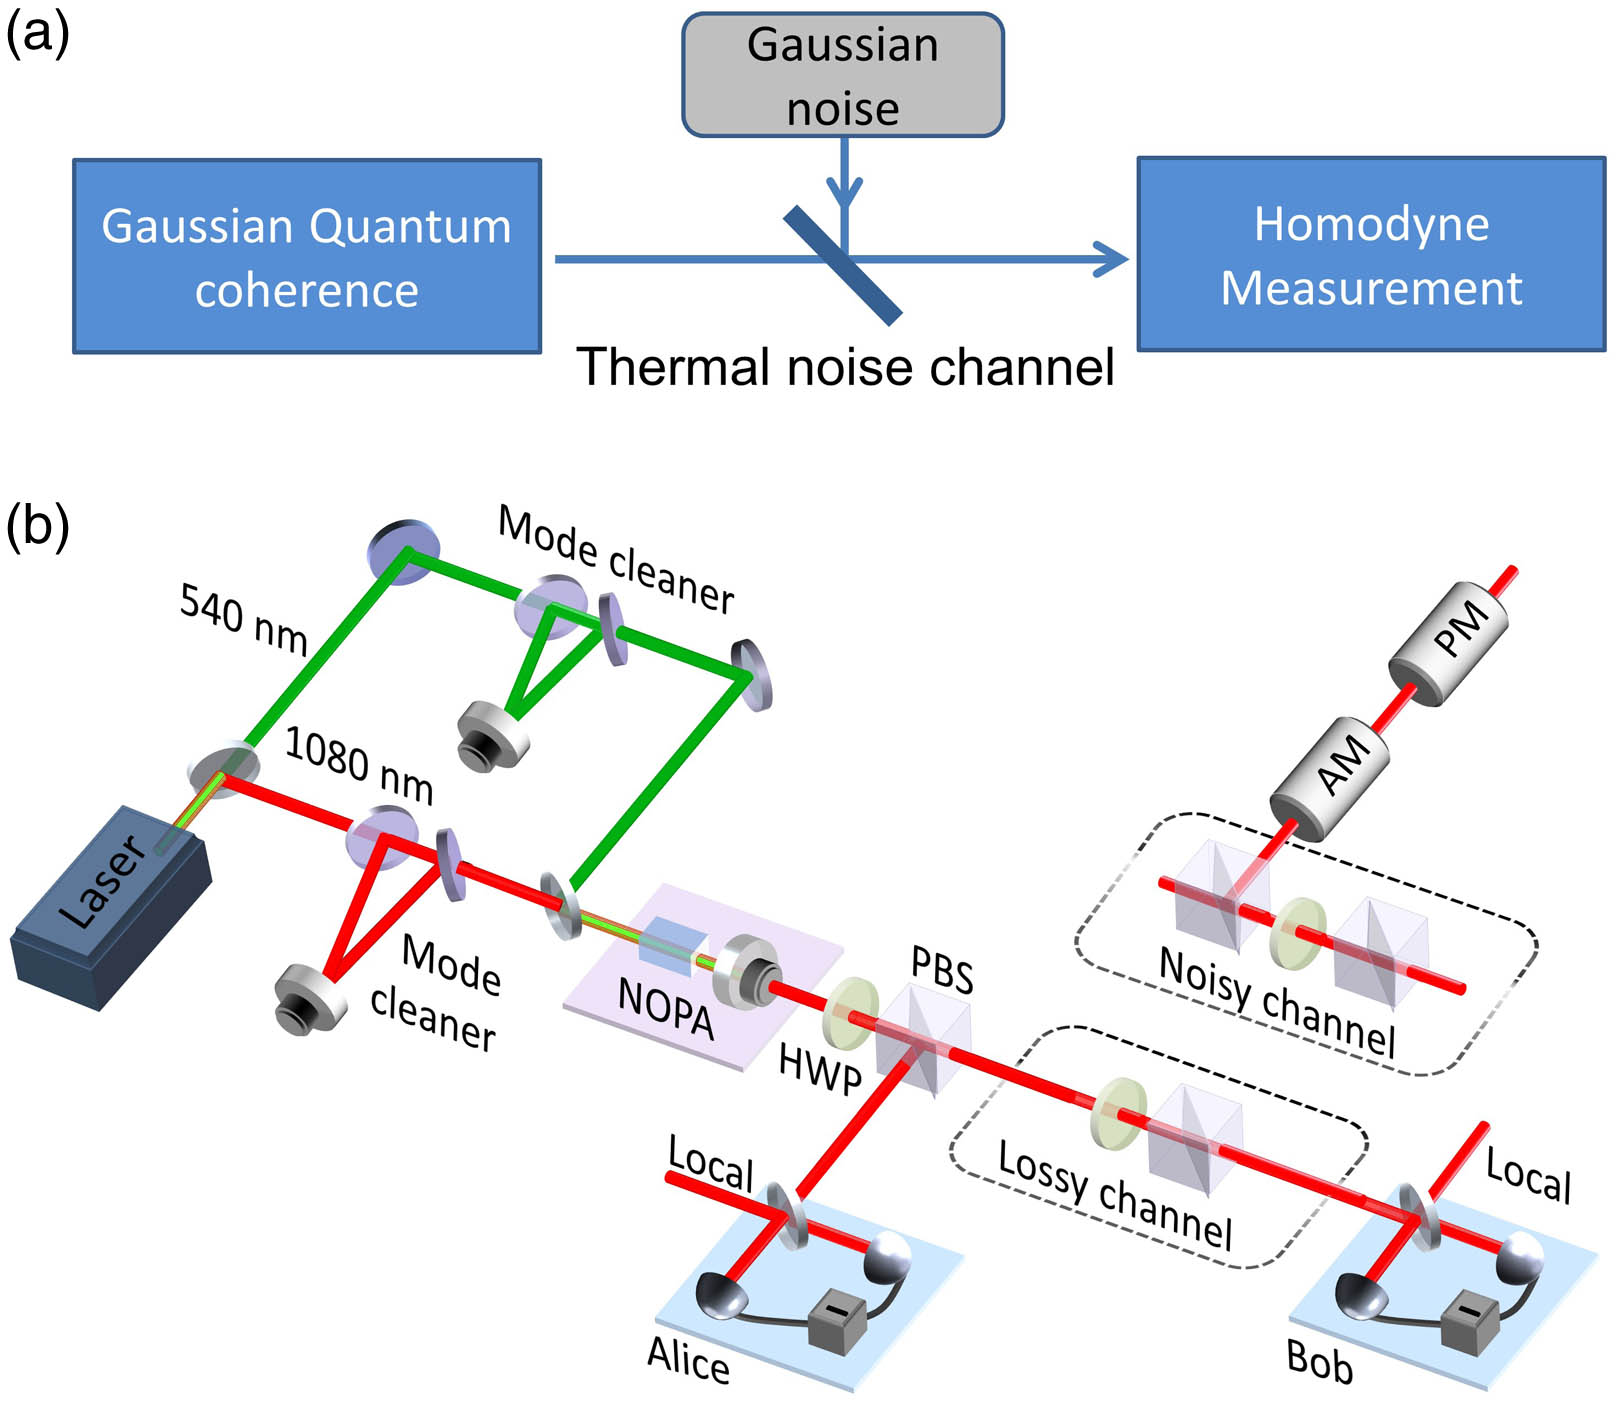 (a) Schematic of transmitting the quantum coherence of a Gaussian state in a thermal noise channel. (b) Experimental setup. The 1080 nm and the 540 nm laser outputs from the Nd:YAP/LBO laser pass through two mode cleaners and are injected into the NOPA as signal light and pump light, respectively. The output modes of the PBS behind the NOPA are an amplitude squeezed state (transmitted mode) and a phase squeezed state (reflected mode) or EPR entanglement state, when the HWP behind the NOPA is set to 22.5° or 0°, respectively. We use homodyne detectors to measure the output modes and a digital storage oscilloscope to record the experimental data. The interference efficiencies of homodyne detectors are 99%, and the quantum efficiencies of photodiodes (LASER COMPONENTS, InGaAs-PD-500um) are 99.6%. AM, amplitude modulator; PM, phase modulator.